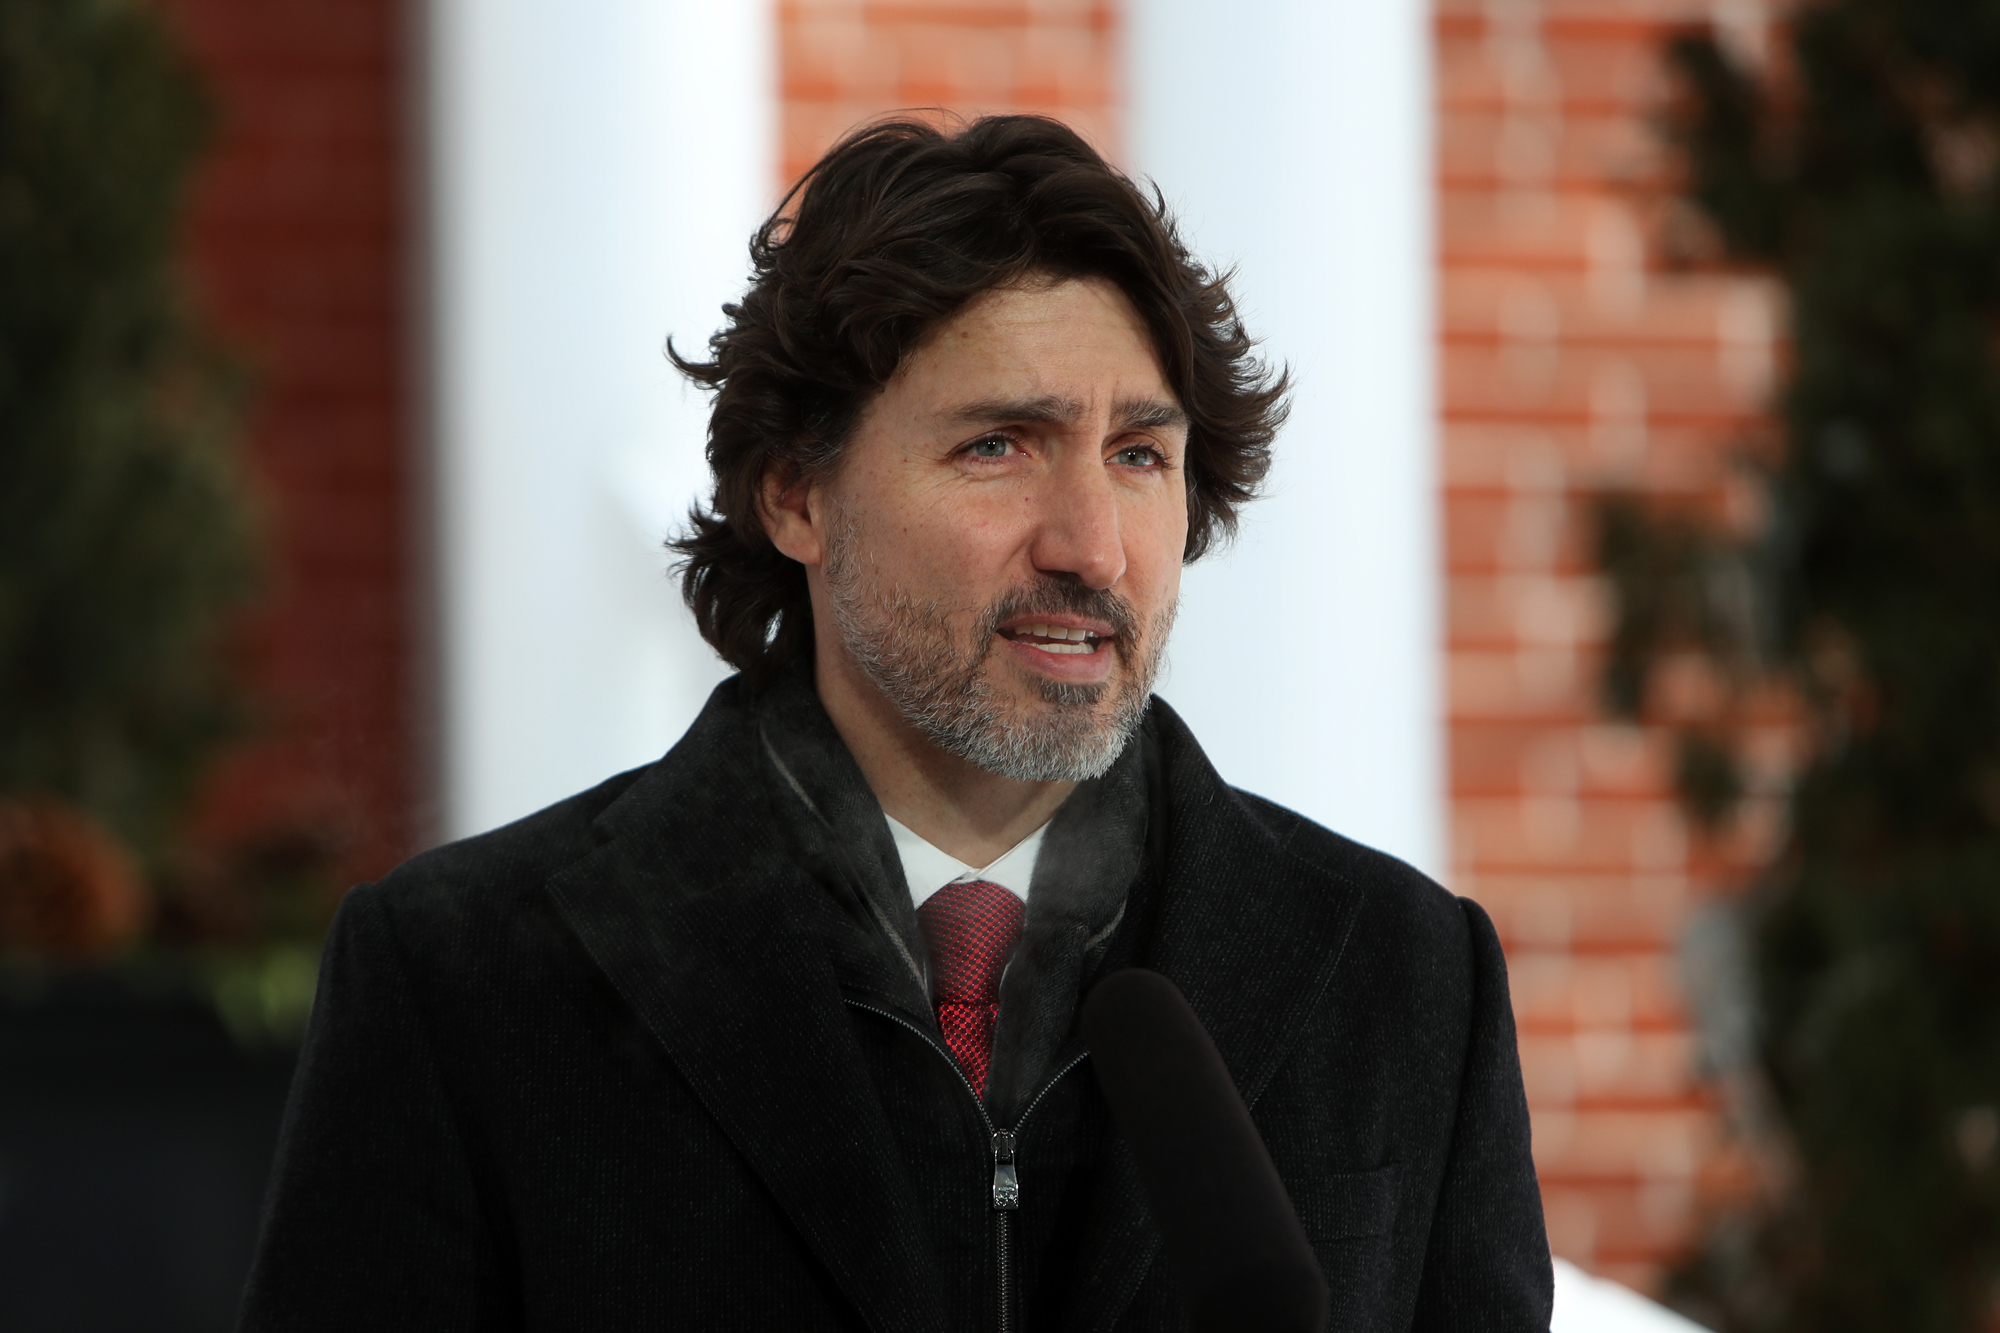 Justin Trudeau, Canada's prime minister, speaks during a news conference in Ottawa, Ontario, Canada, on February 12.